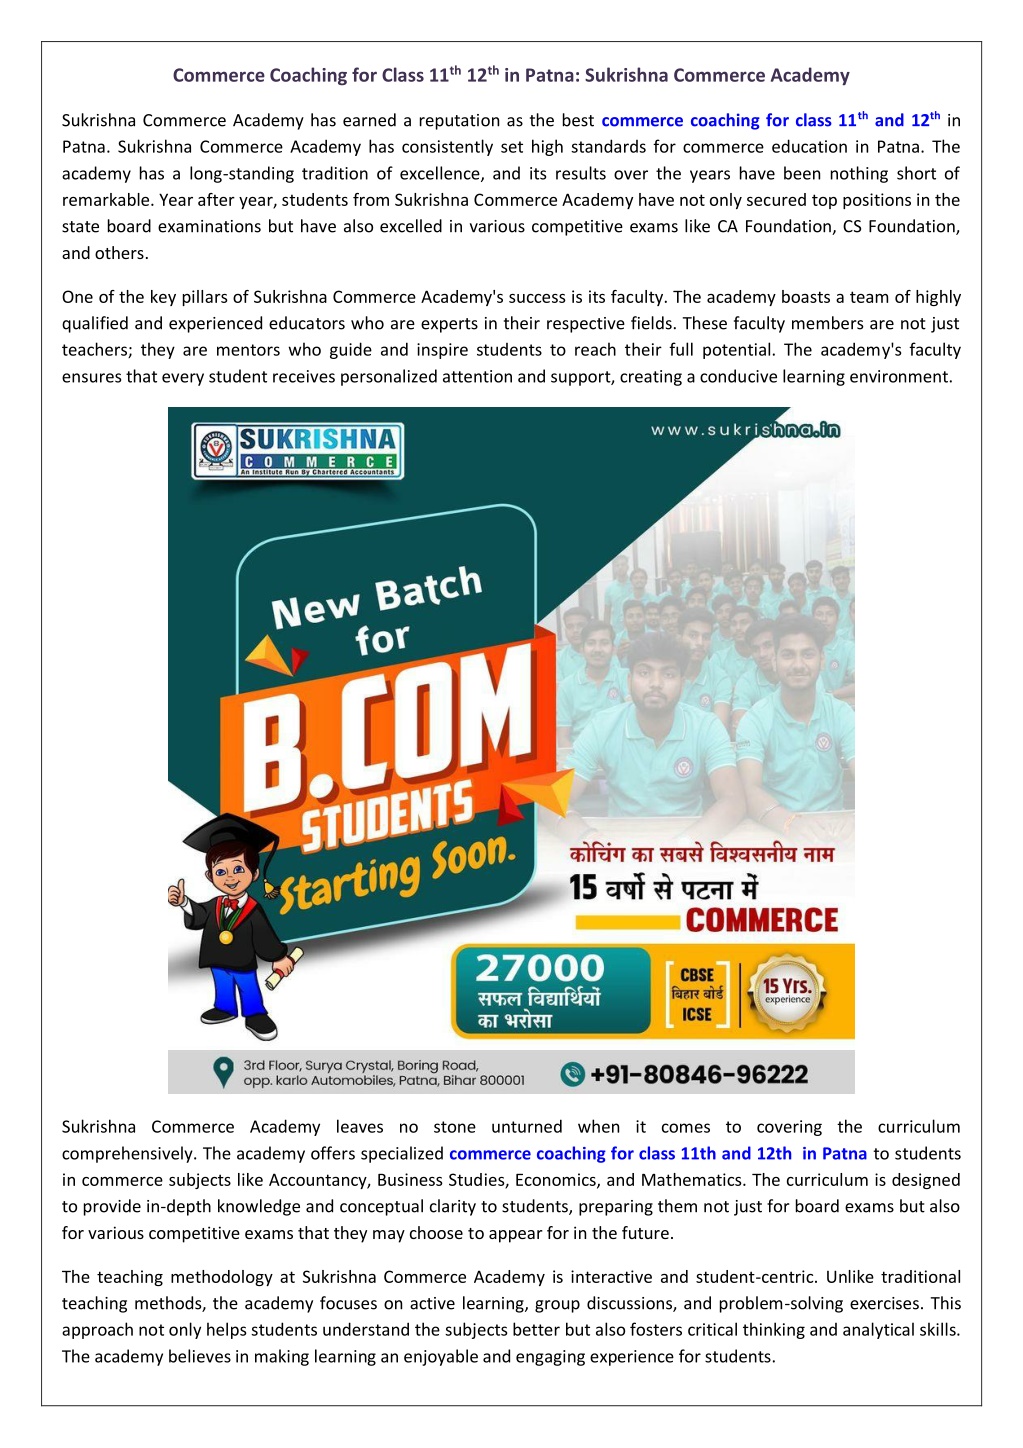 PPT - Commerce Coaching for Class 11th 12th in Patna PowerPoint  Presentation - ID:12554657